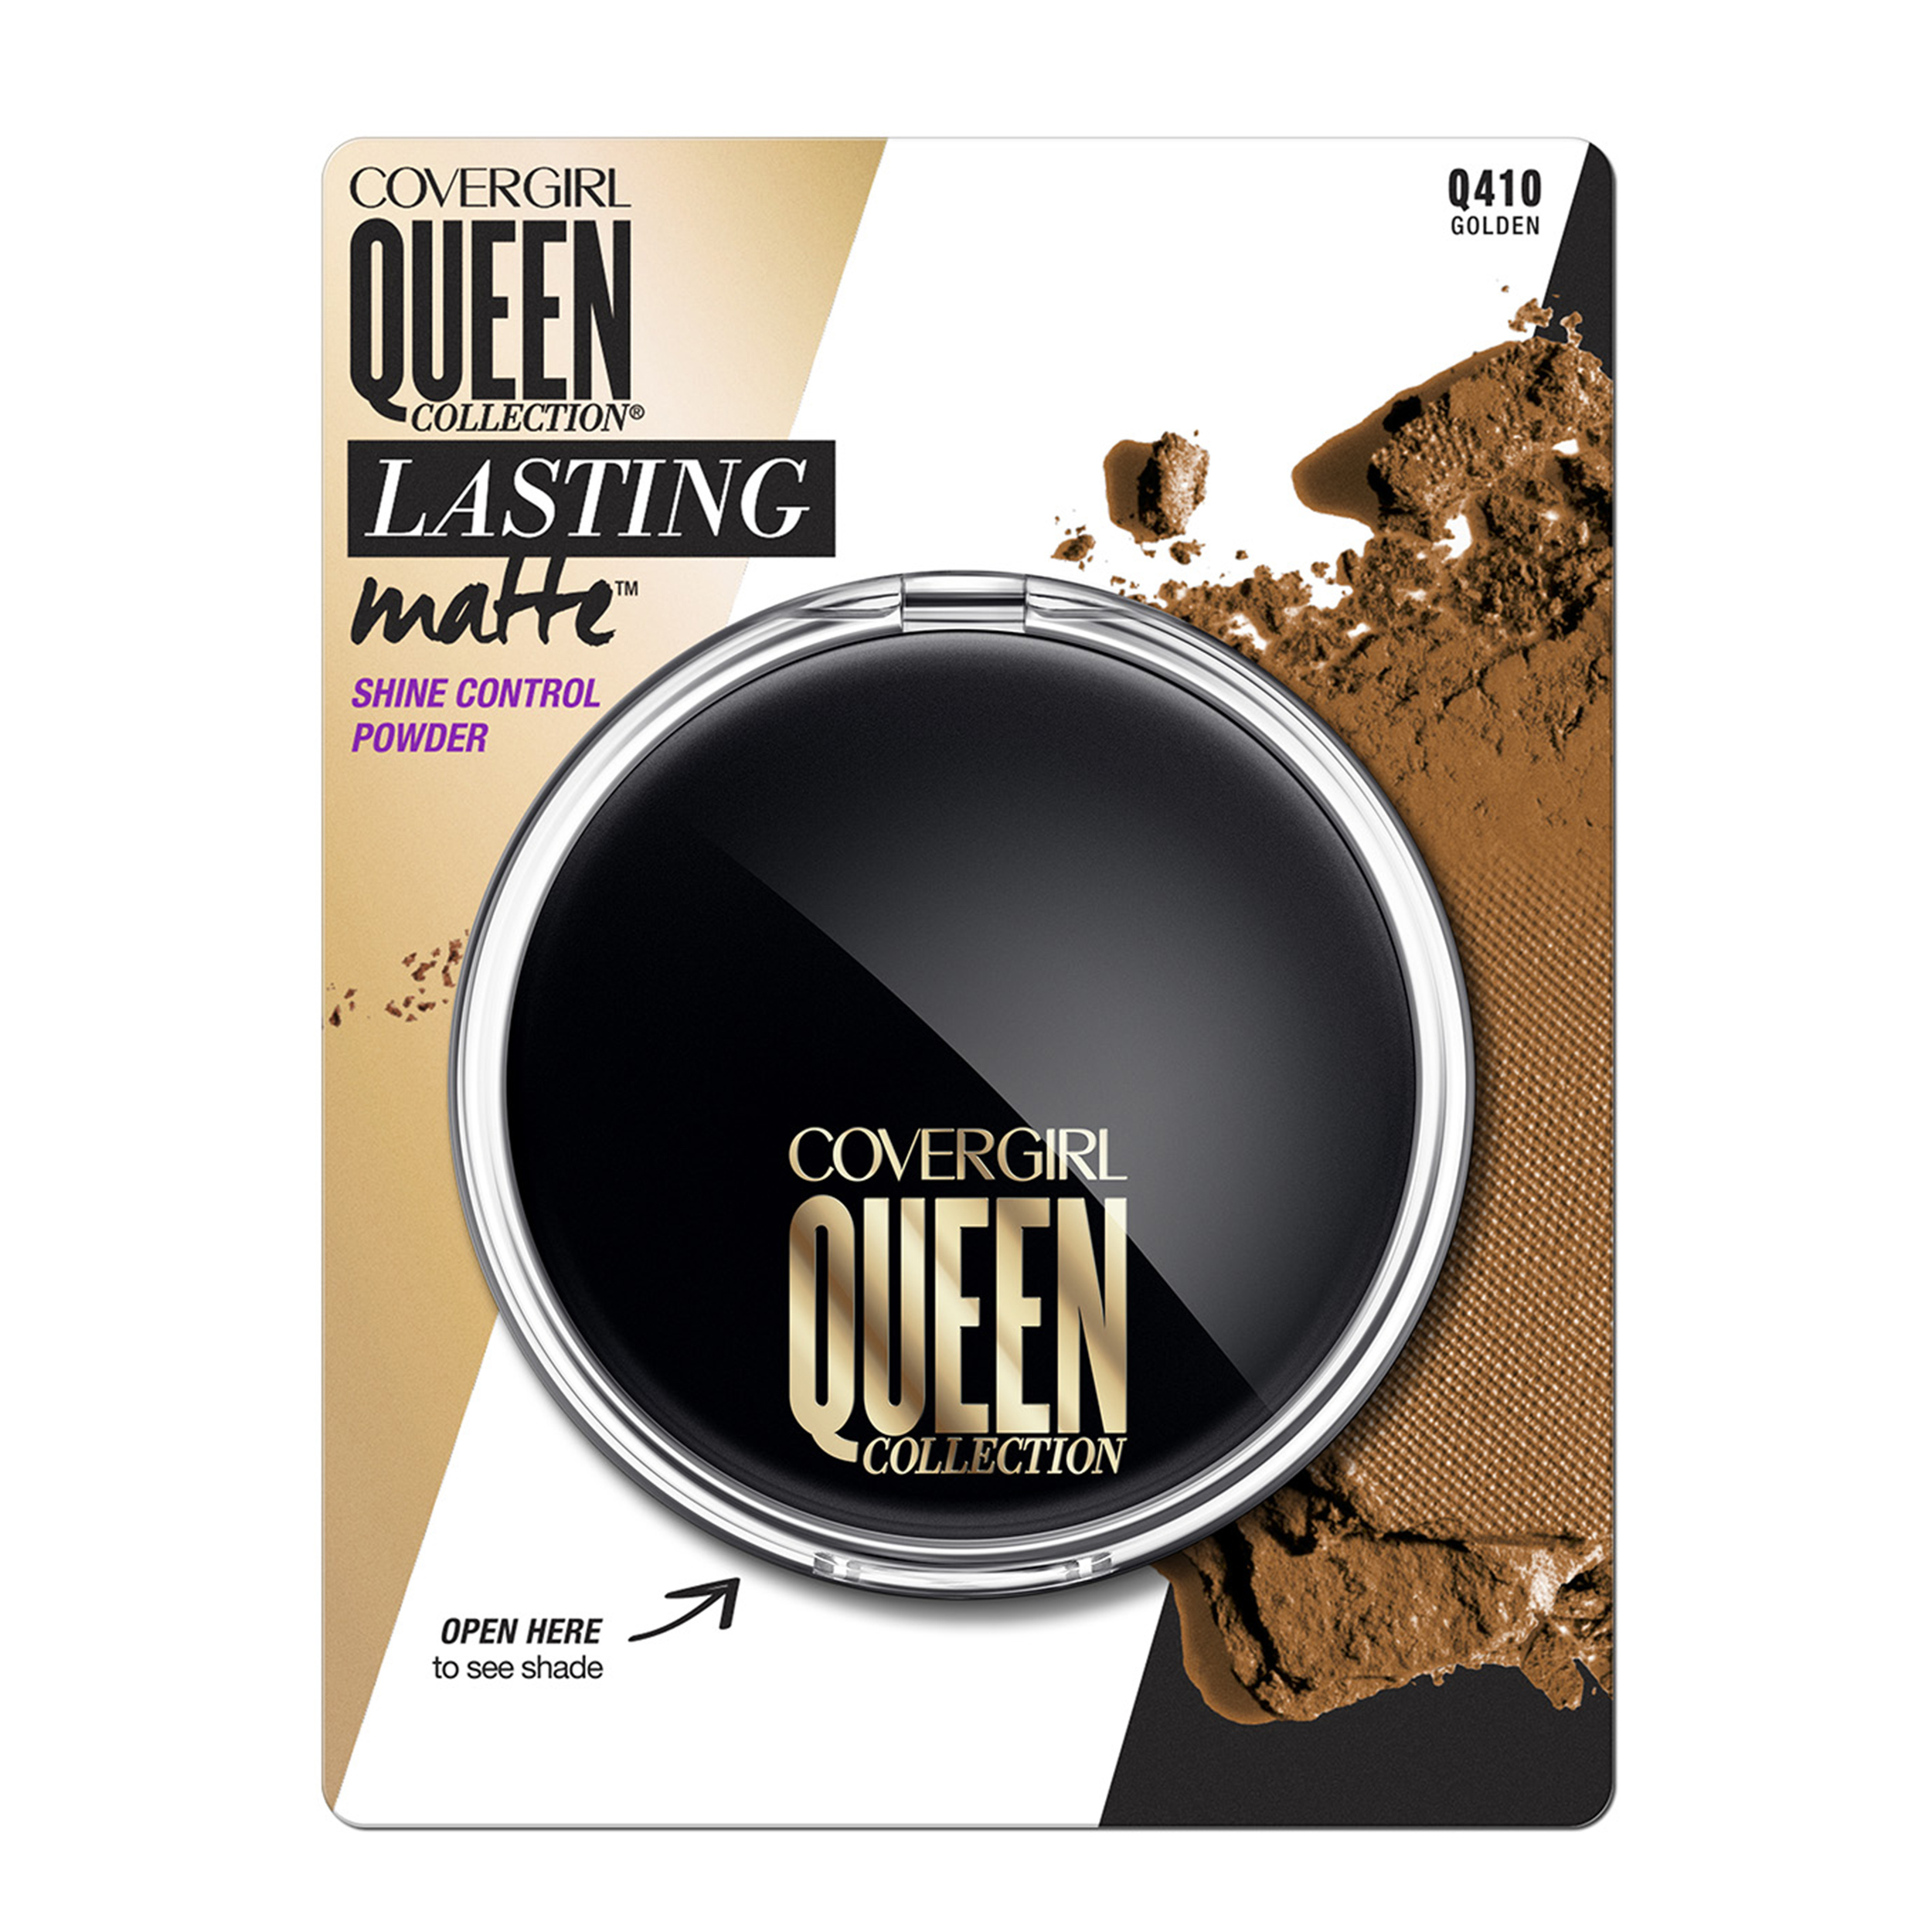 COVERGIRL Queen Lasting Matte Pressed Powder Foundation, Golden - image 2 of 8